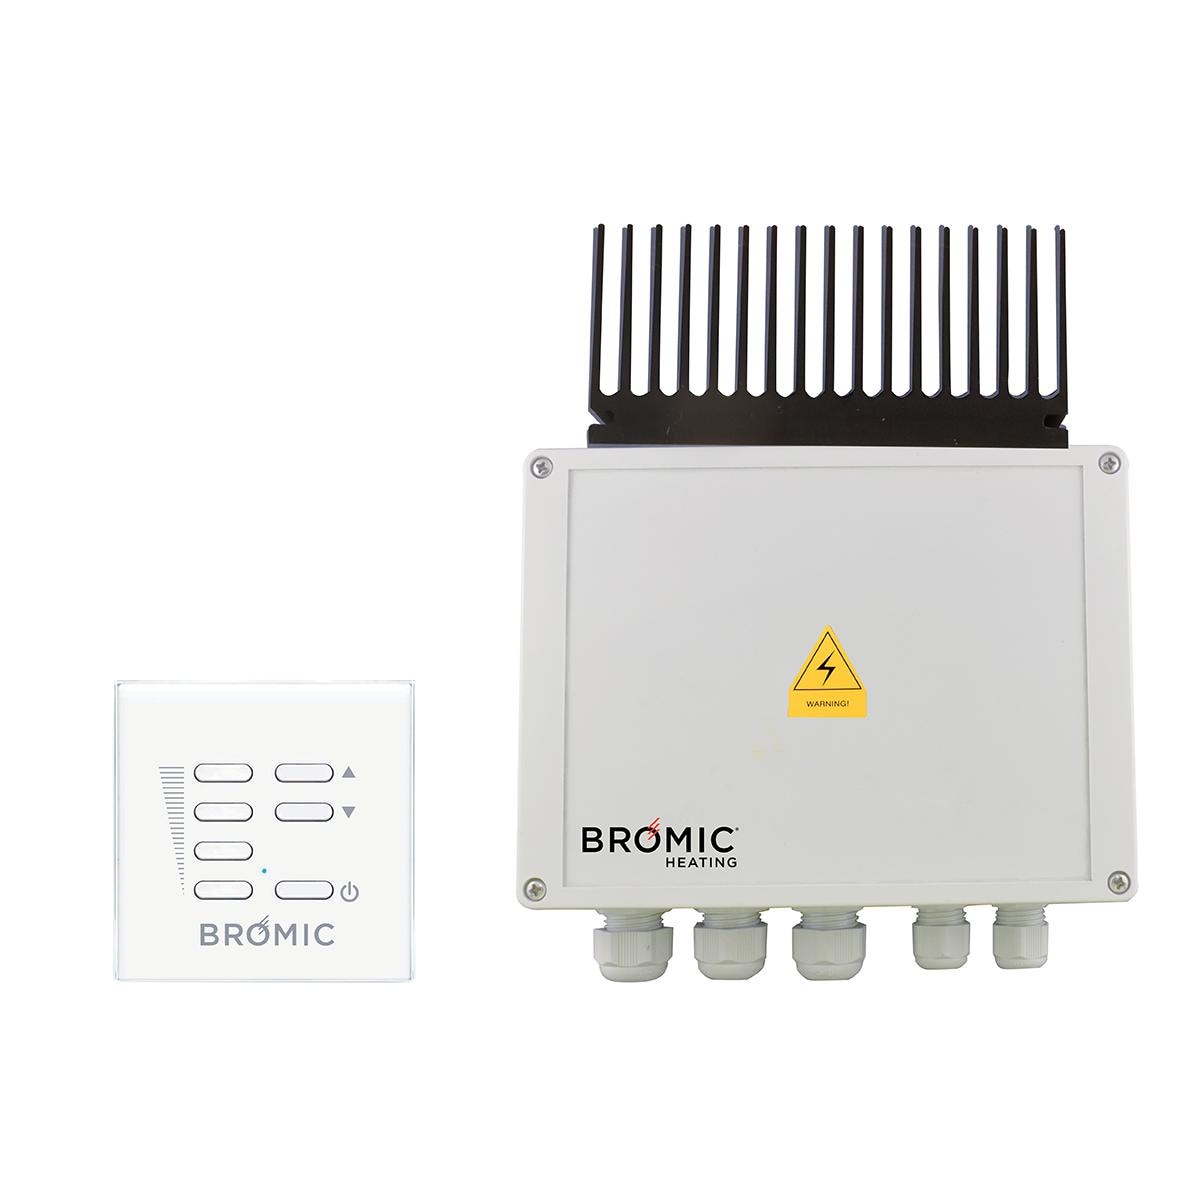 Bromic Heating - Wireless Dimmer Controller With Wireless Remote For Electric Heaters - BH3130011-1